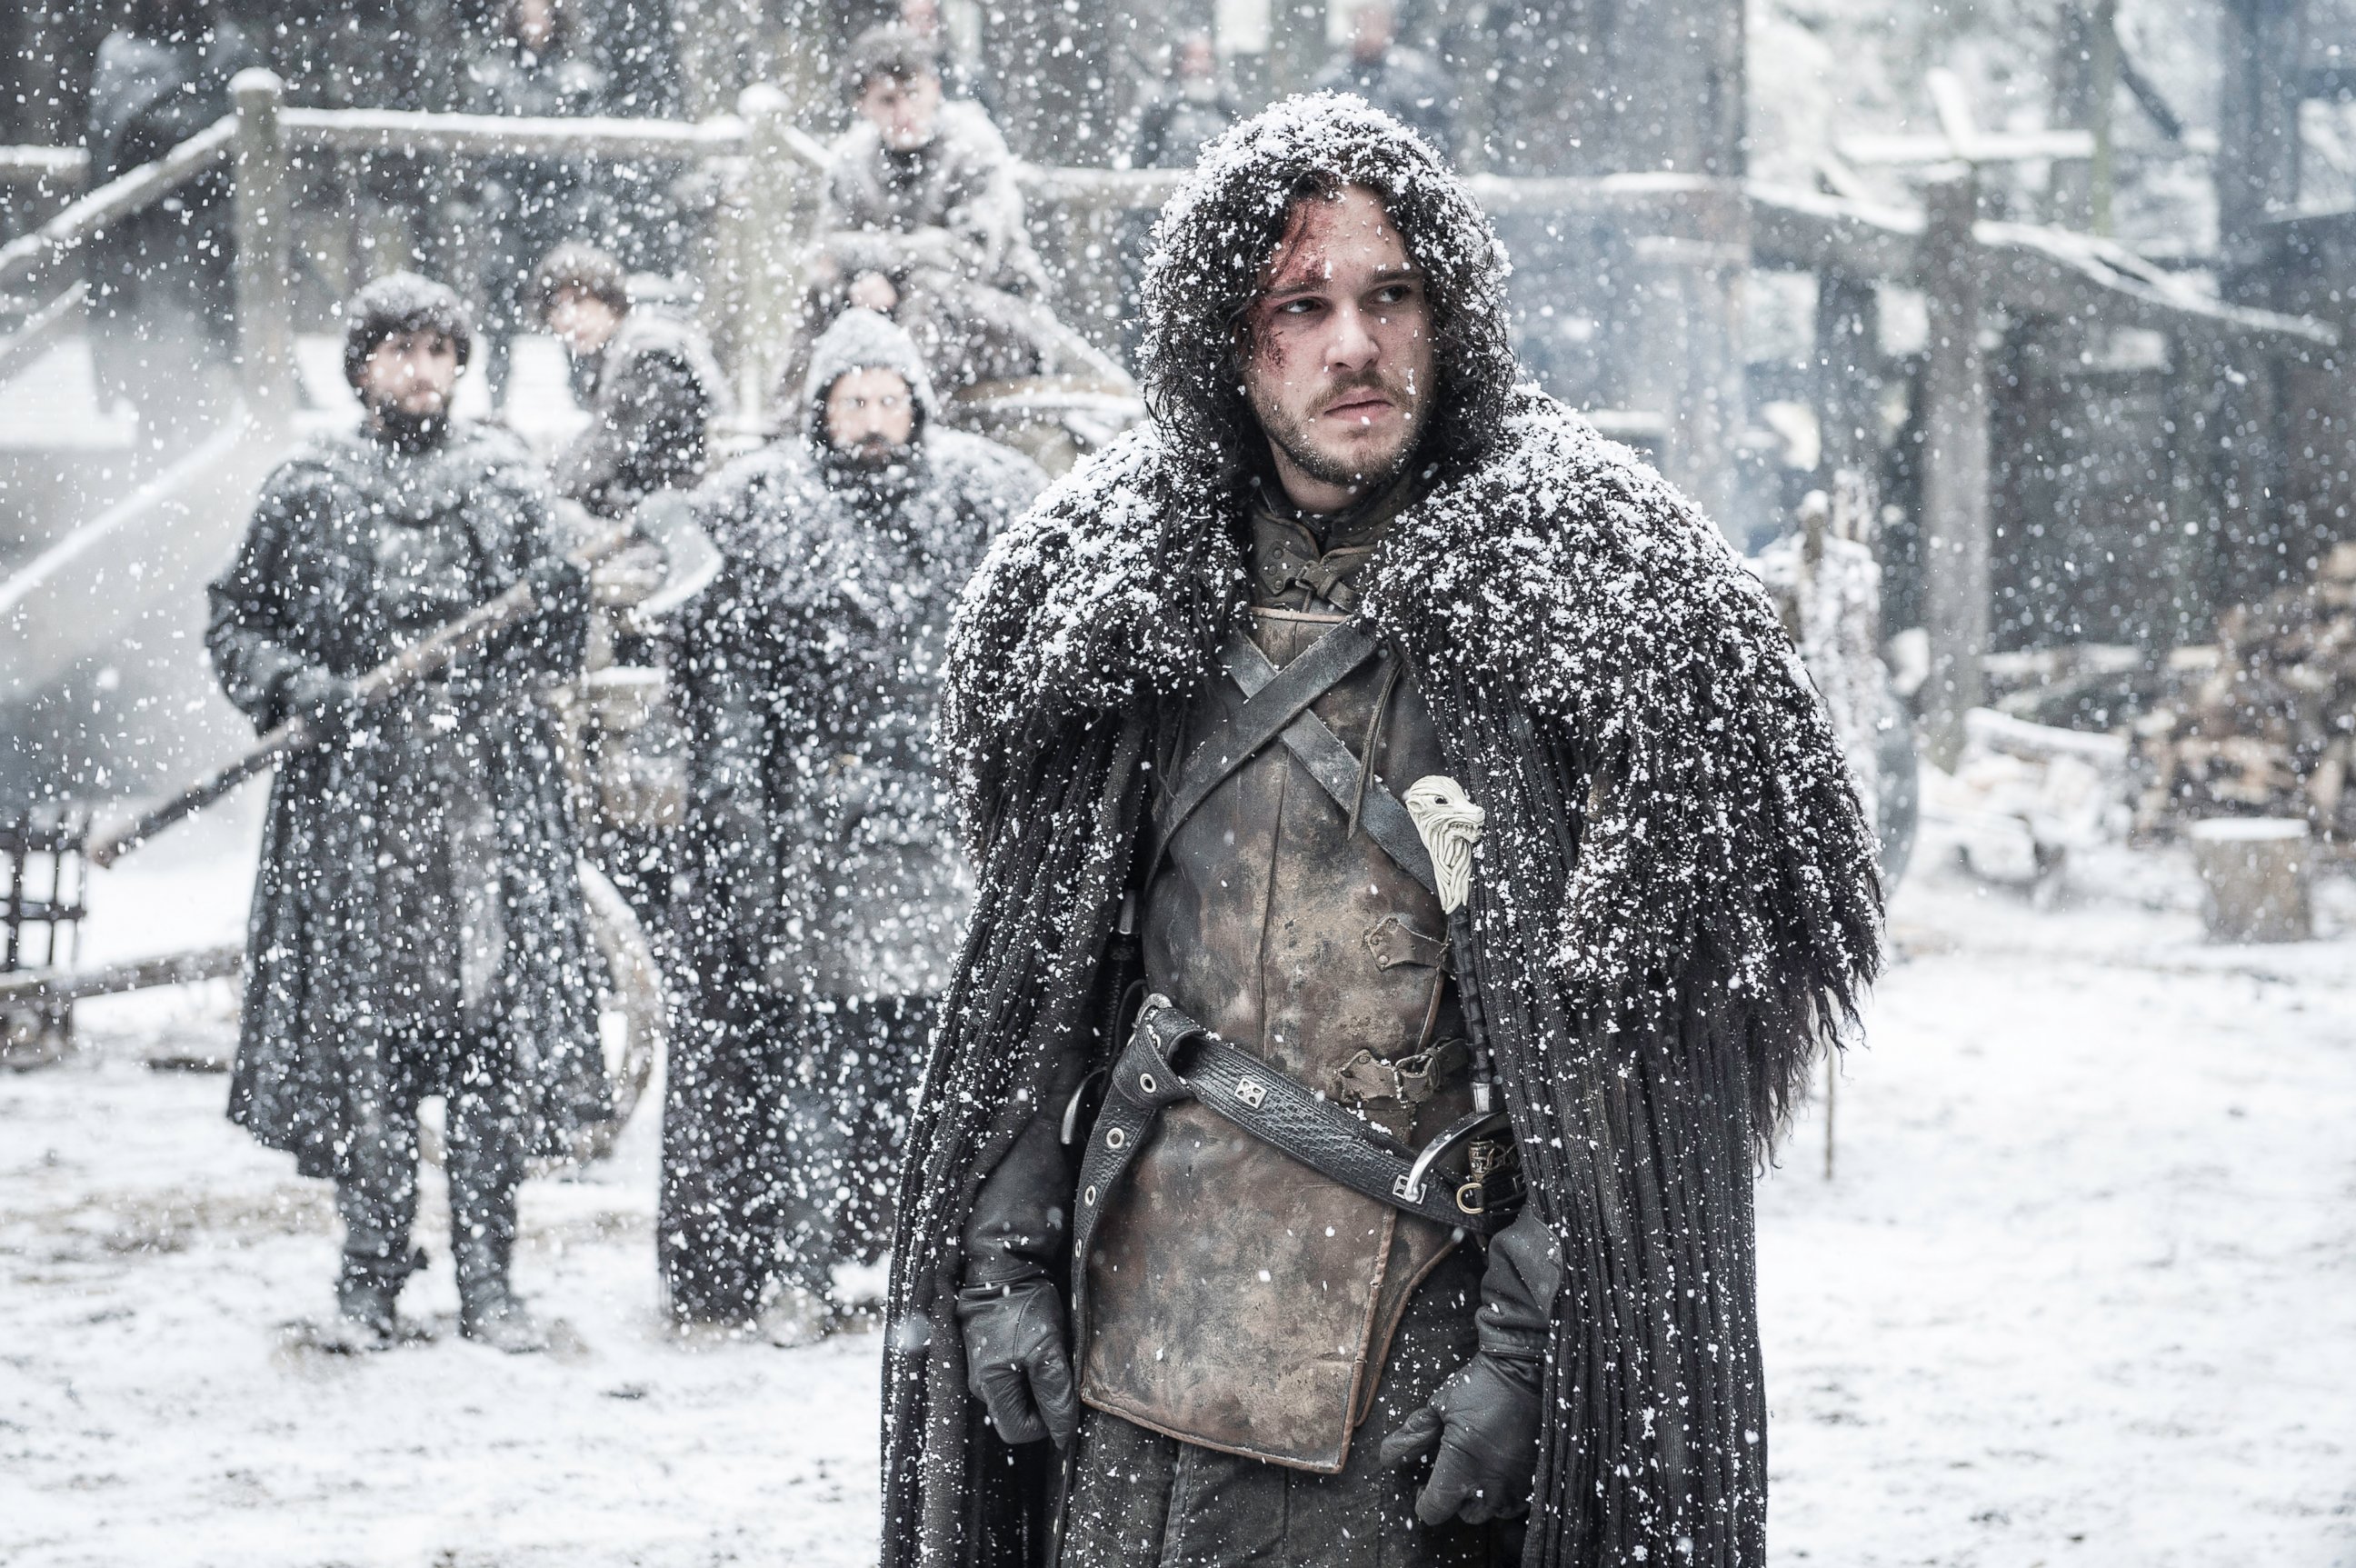 PHOTO: Kit Harington is pictured in a still from "Game of Thrones."